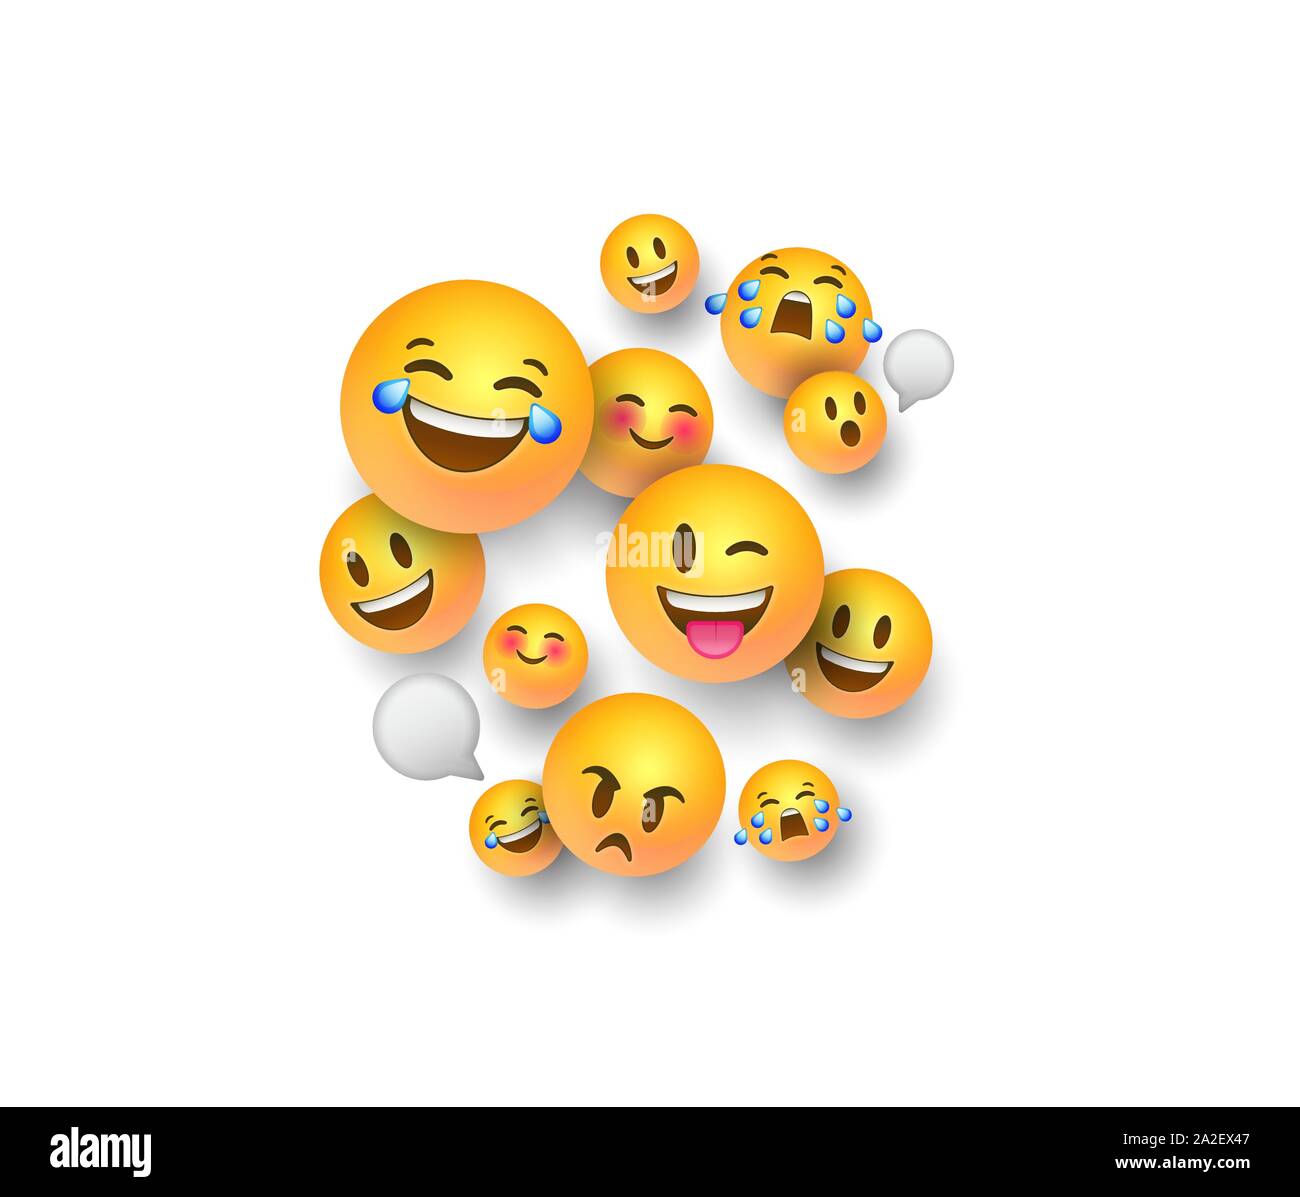 Fun yellow emoticon icons on isolated white background. Smiley faces in 3d style includes chat bubble, happy, cute and funny emotions. Stock Vector